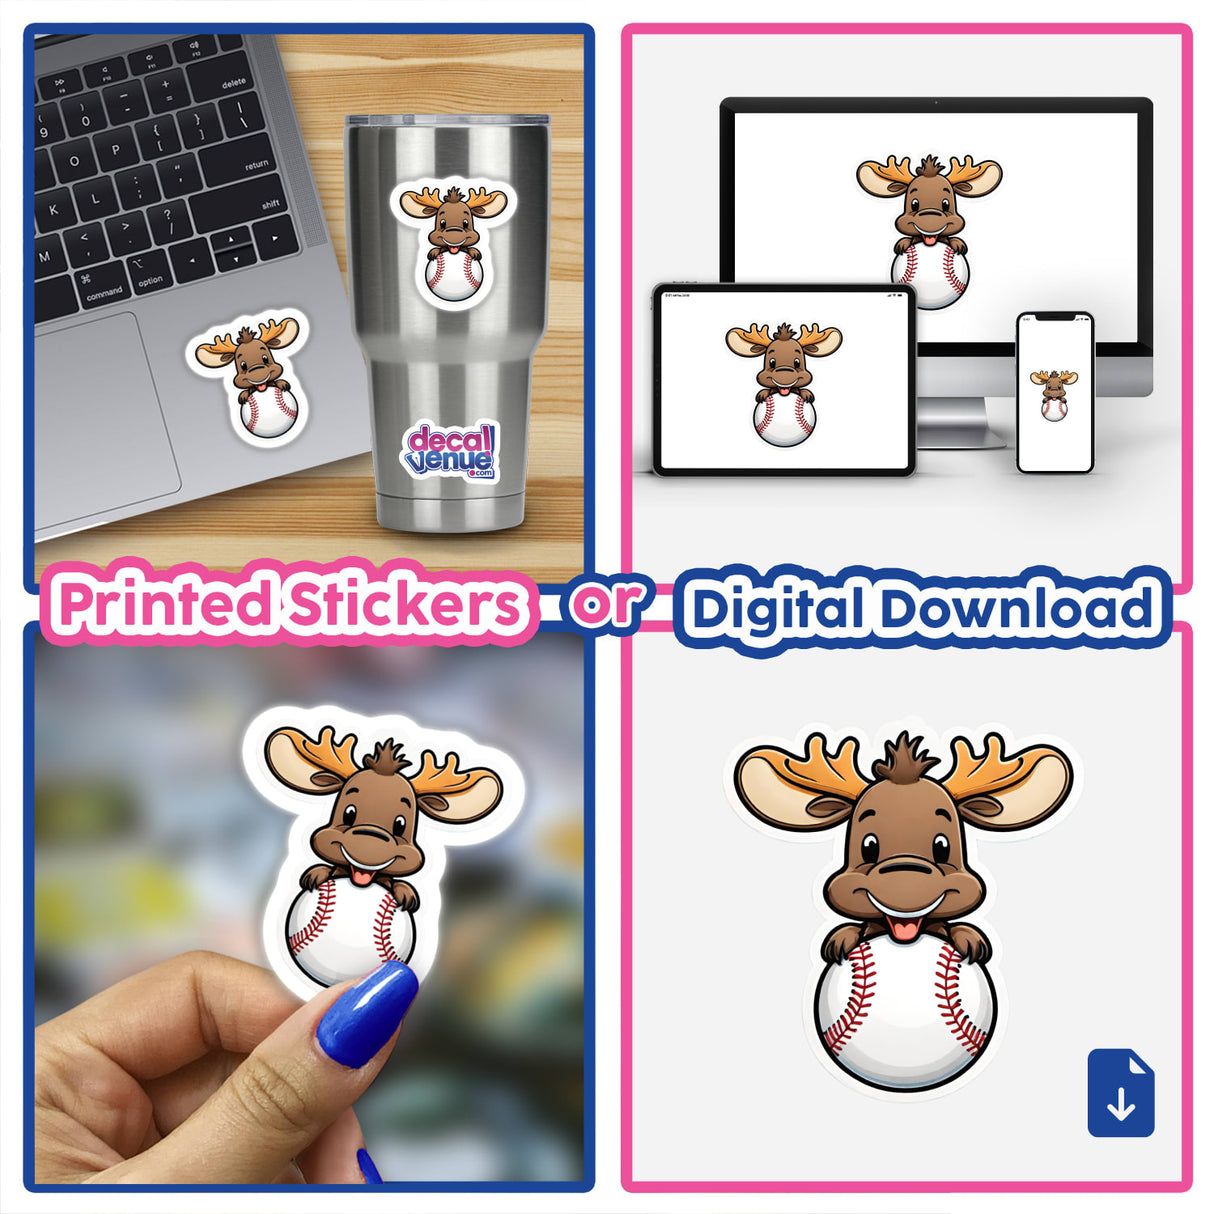 Playful baseball moose digital artwork featuring a moose character with antlers holding a baseball, displayed on various digital devices and as a printed sticker.